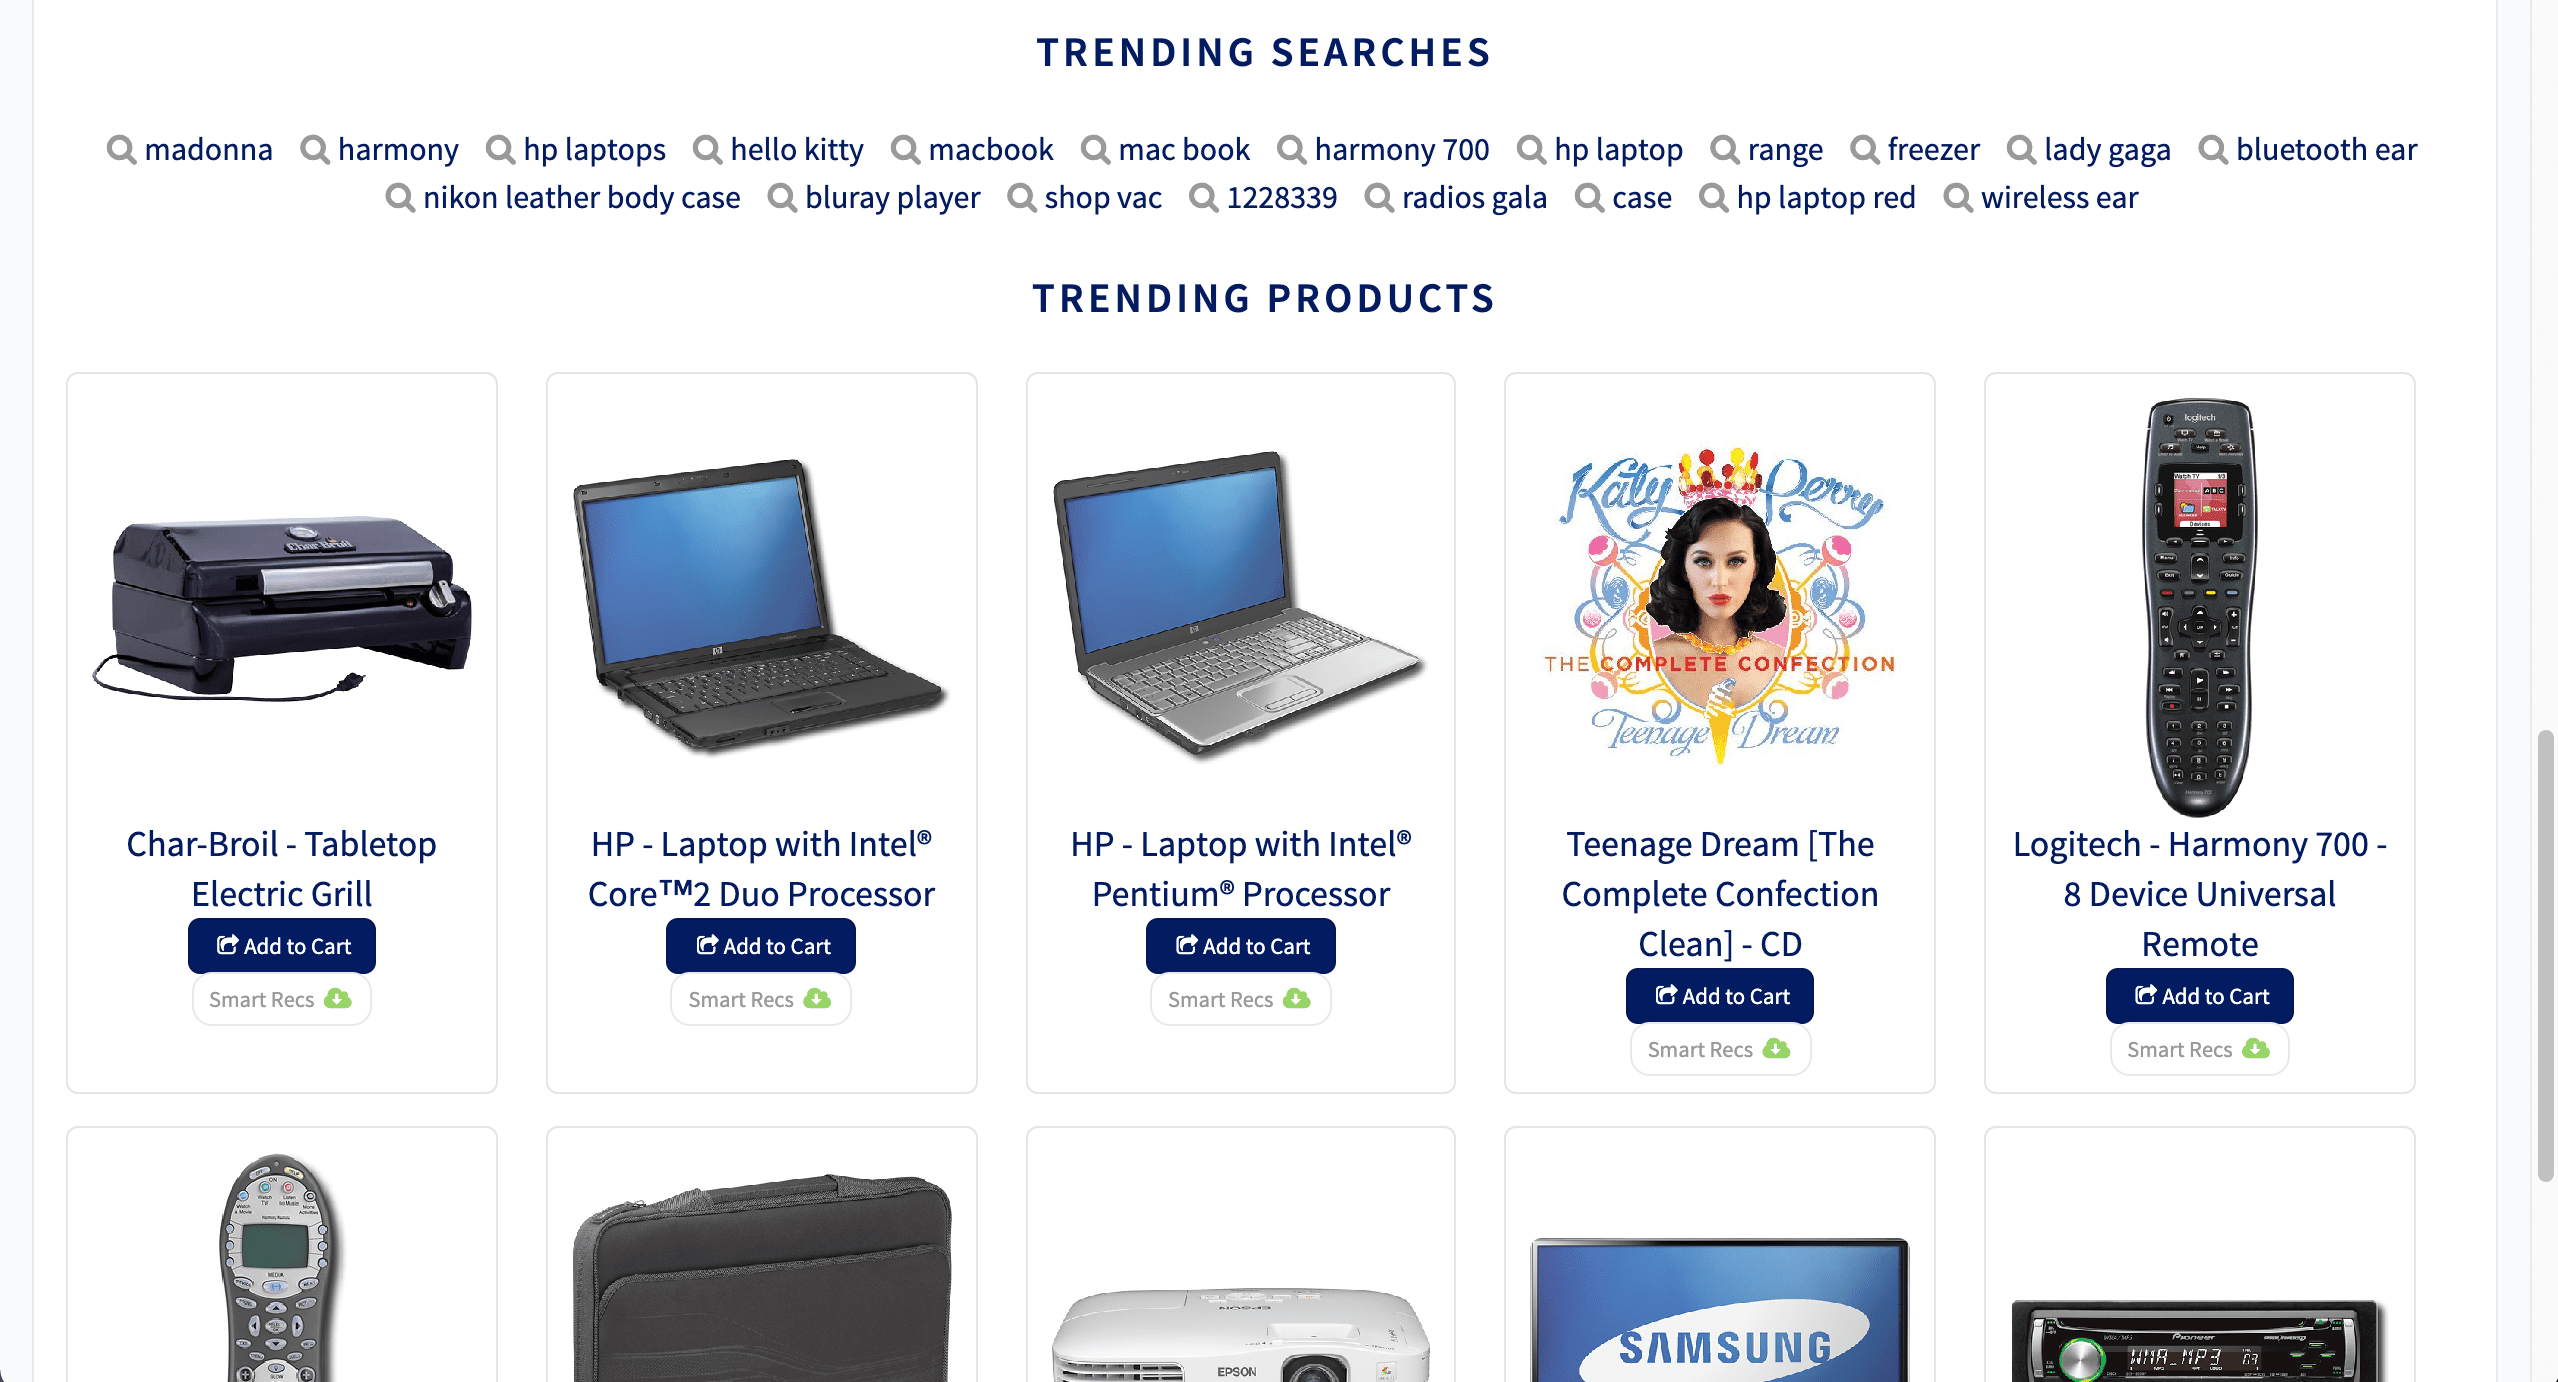 Trending queries and products